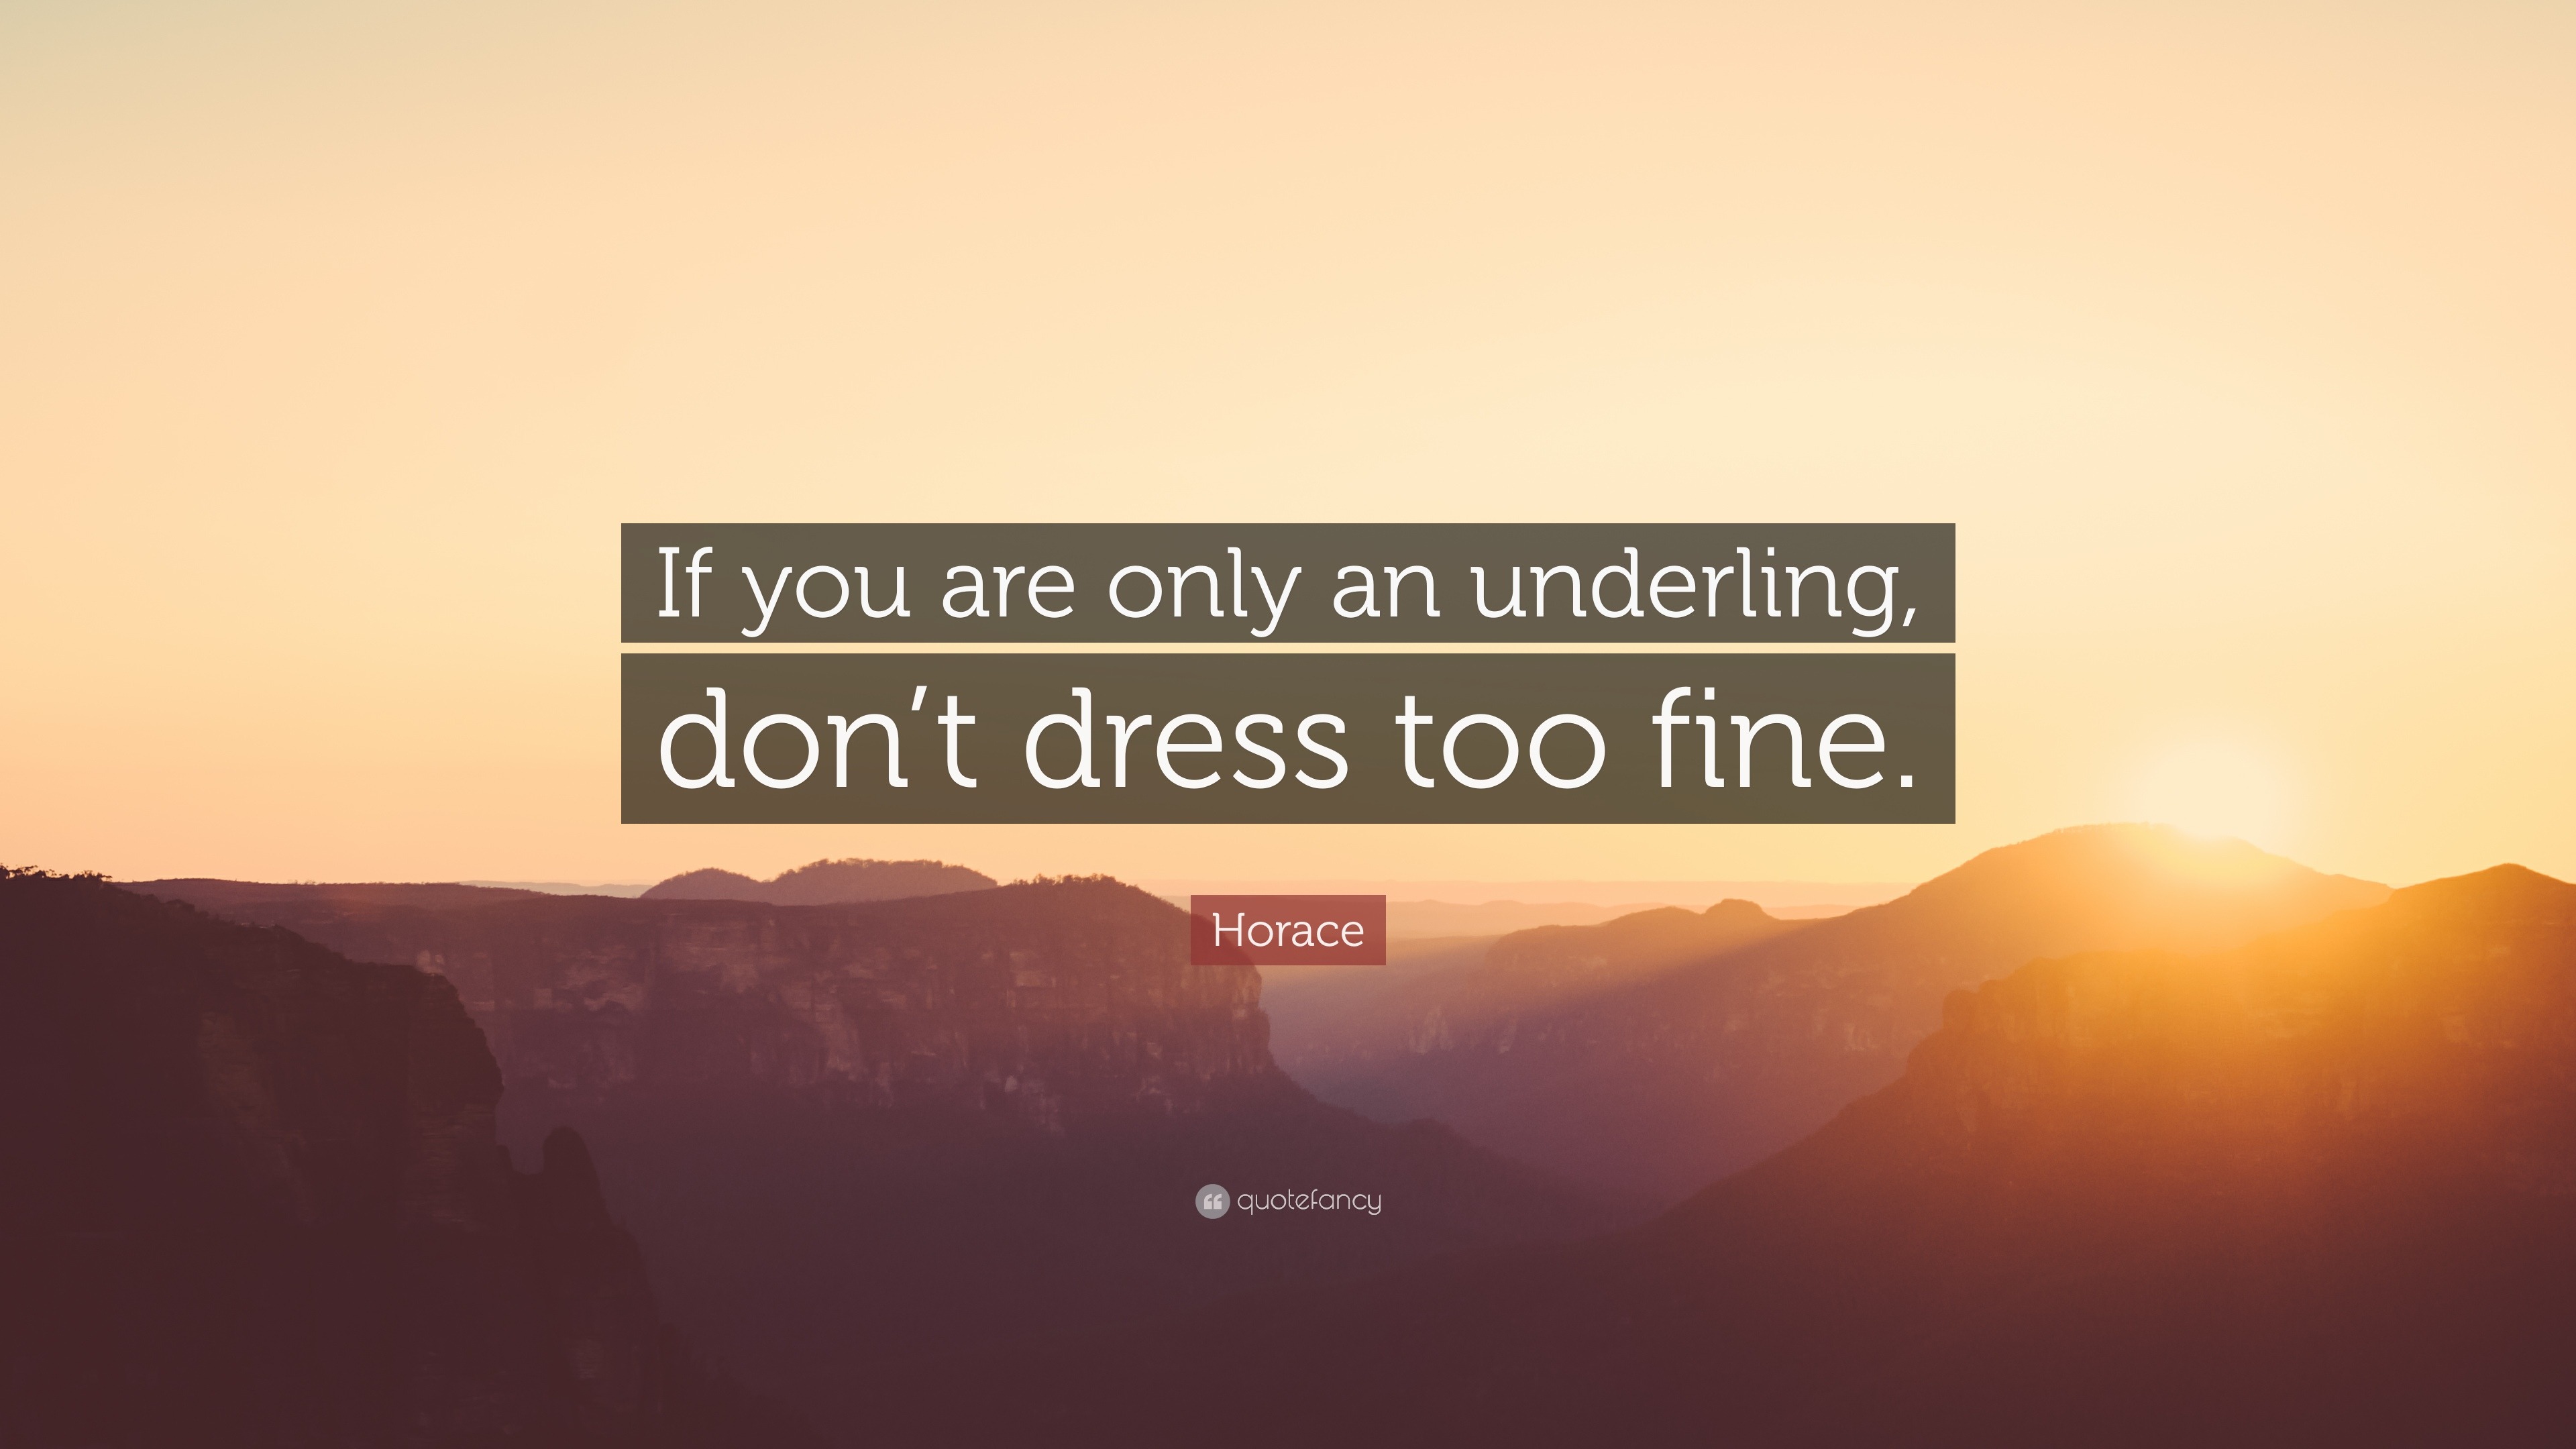 60 Best Dress Quotes, Black & Red Dress Quotes & Captions for Instagram